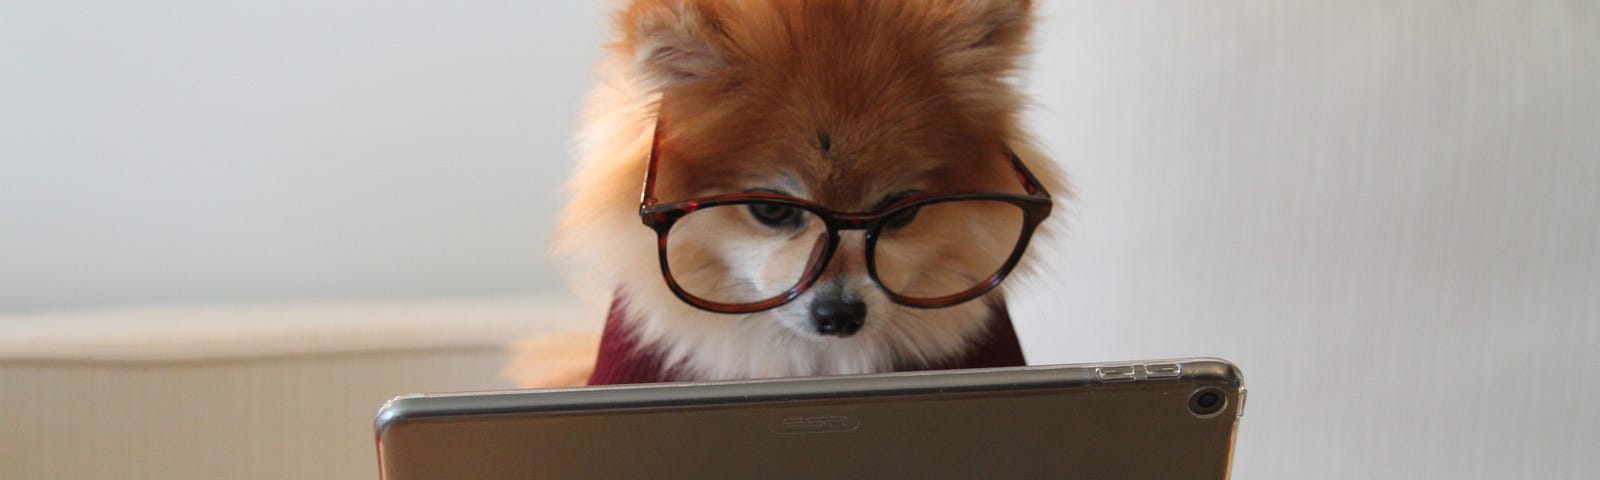 Dog wearing glasses and typing